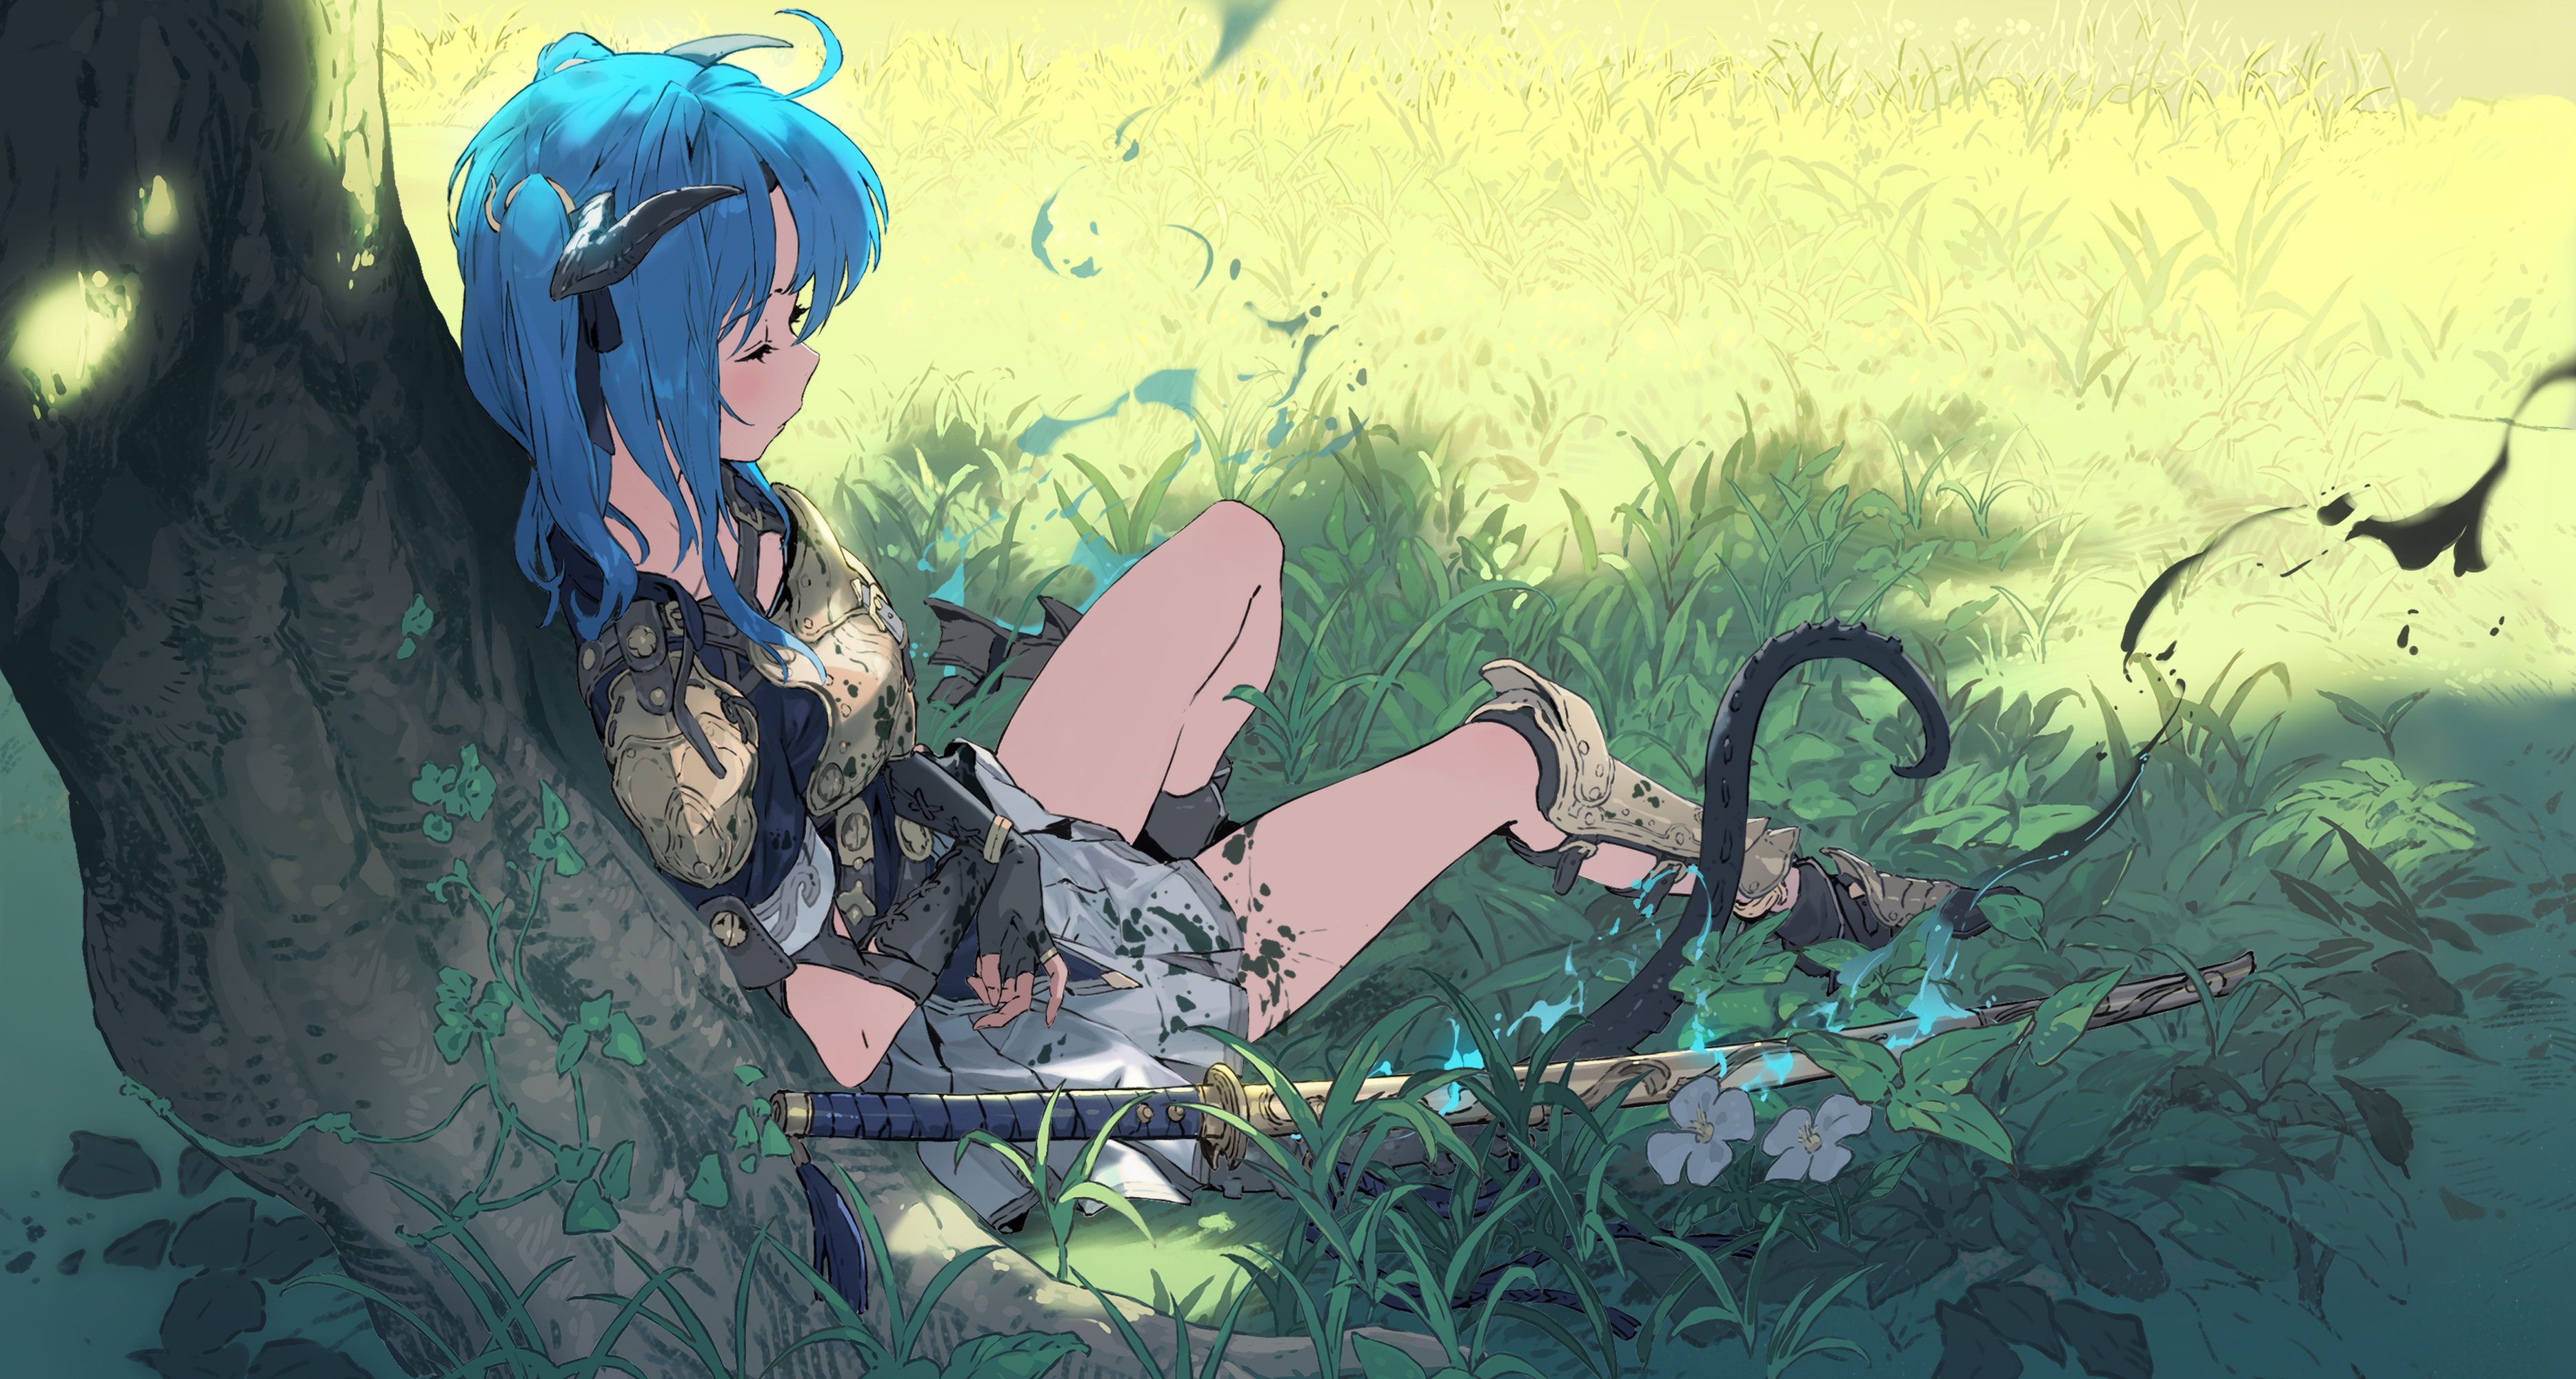 Anime 3736x2000 anime girls girl in armor blue eyes trees closed eyes leaves fingerless gloves grass weapon Breastplate blue flames vines horns ink katana fire twintails sitting outdoors women outdoors Hirooka Masaki tentacles armor sunlight ground sleeping flowers gloves anime